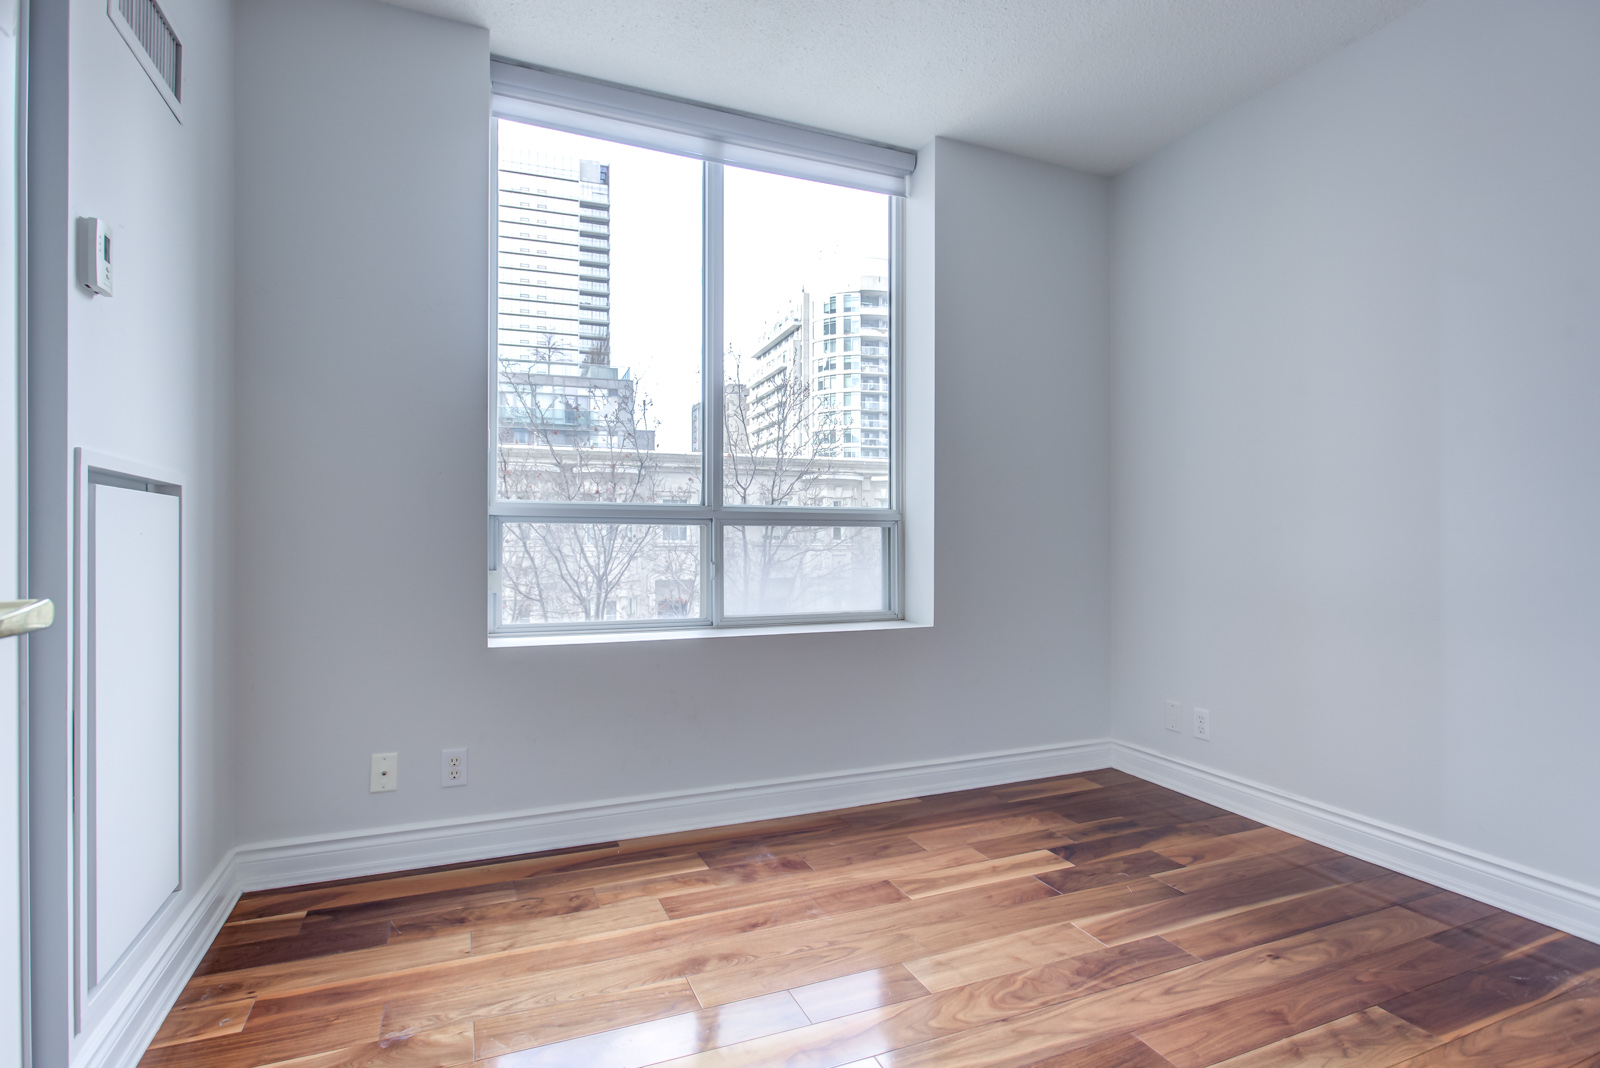 Bedroom with newly-painted gray walls and shiny dark brown hardwood floor at 20 Collier St Unit 408.